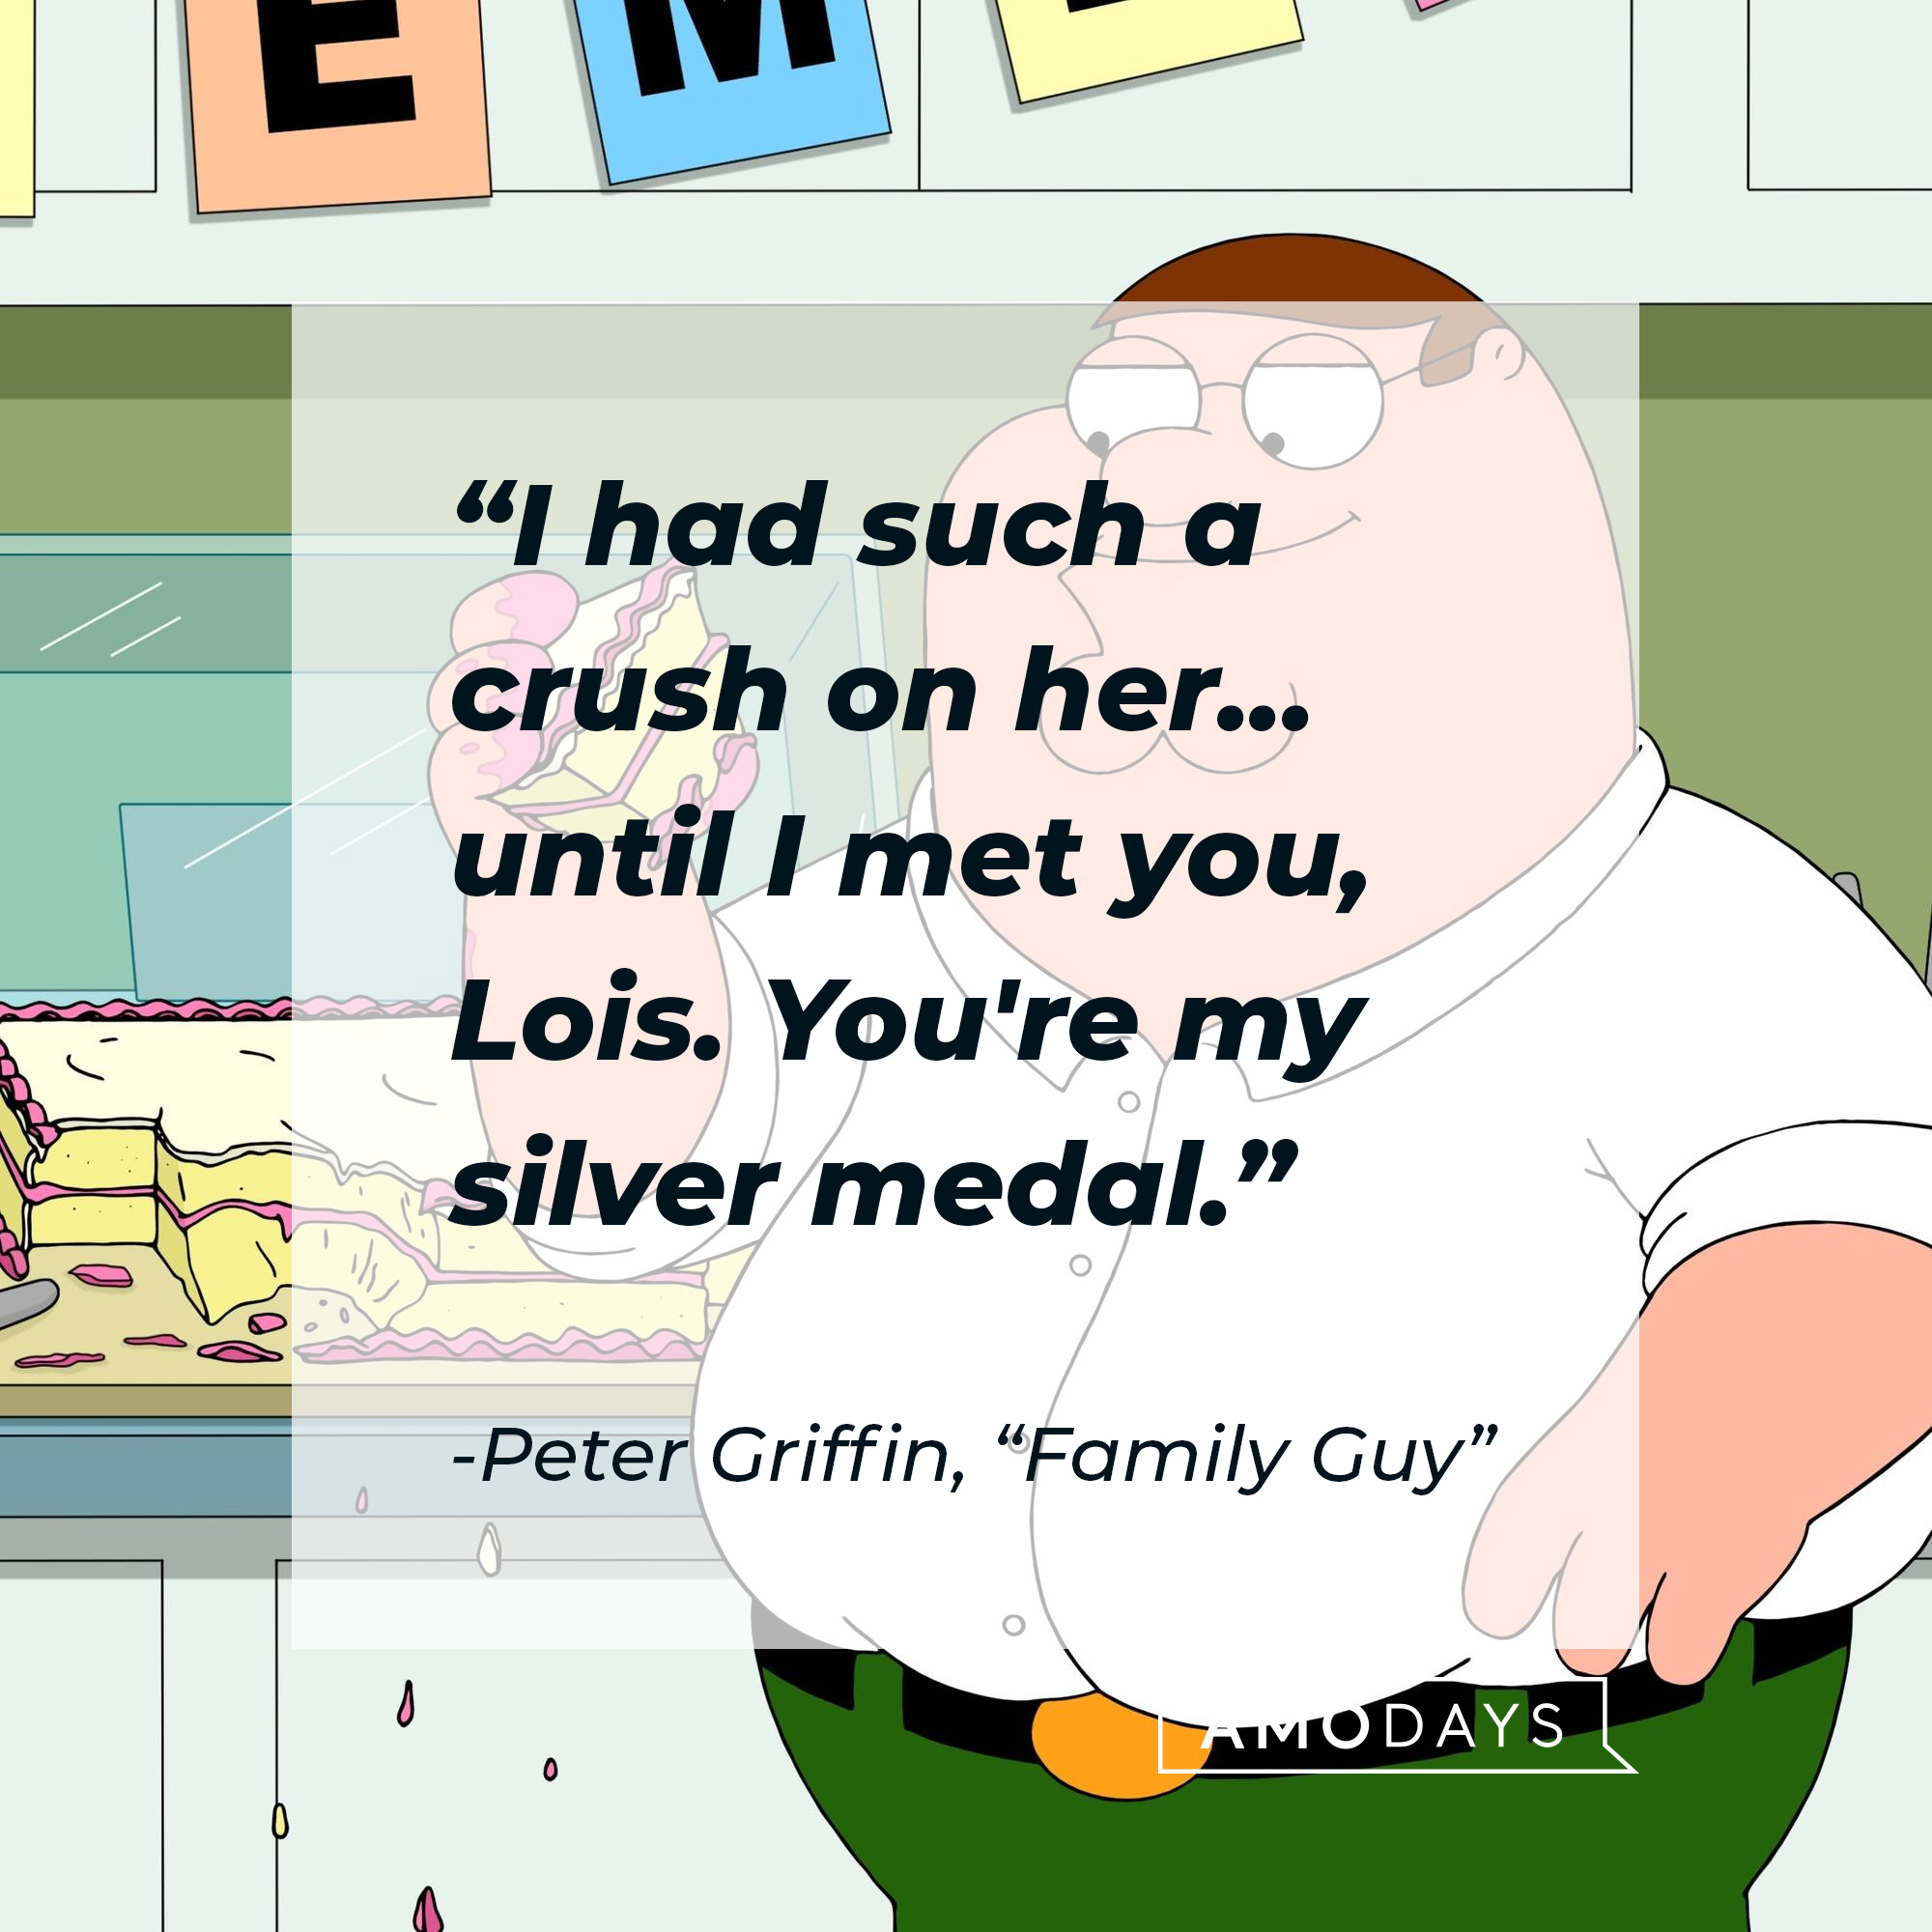 Peter Griffin's quote: "I had such a crush on her... until I met you, Lois. You're my silver medal." | Source: facebook.com/FamilyGuy